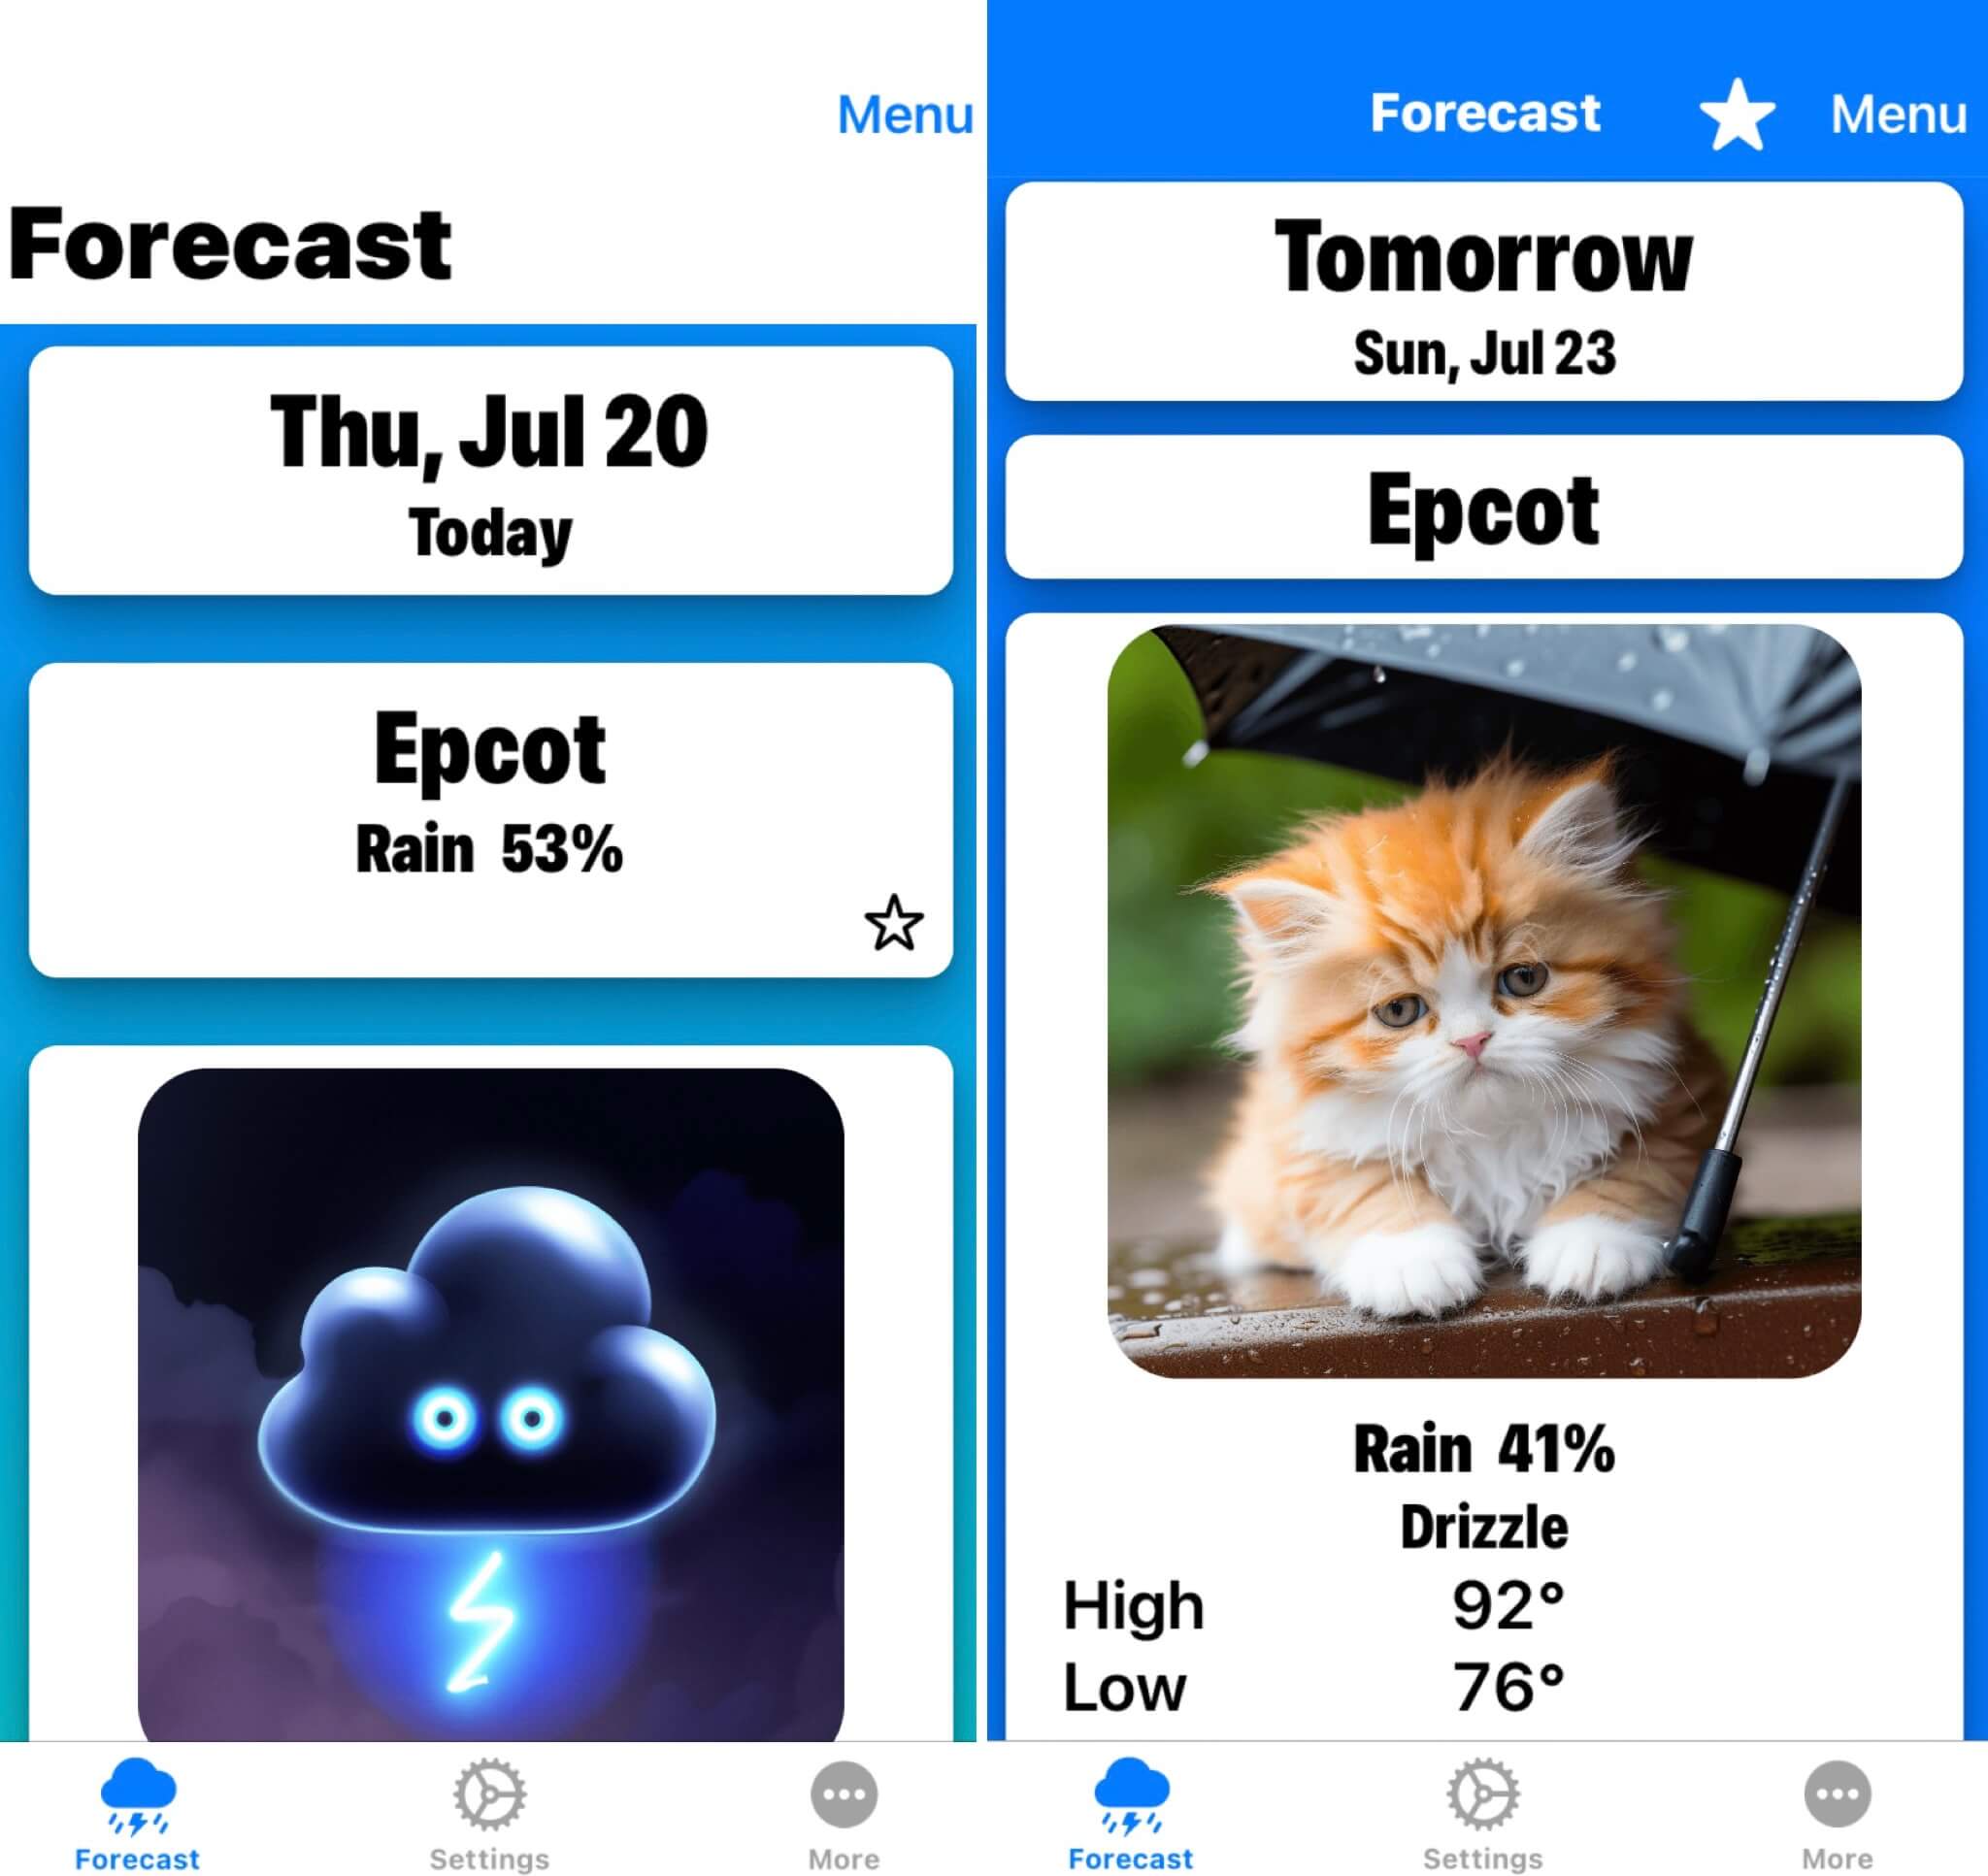 The new forecast screen. It shows more data and it&rsquo;s also showing an image of a cute kitten under an umbrella on a day.